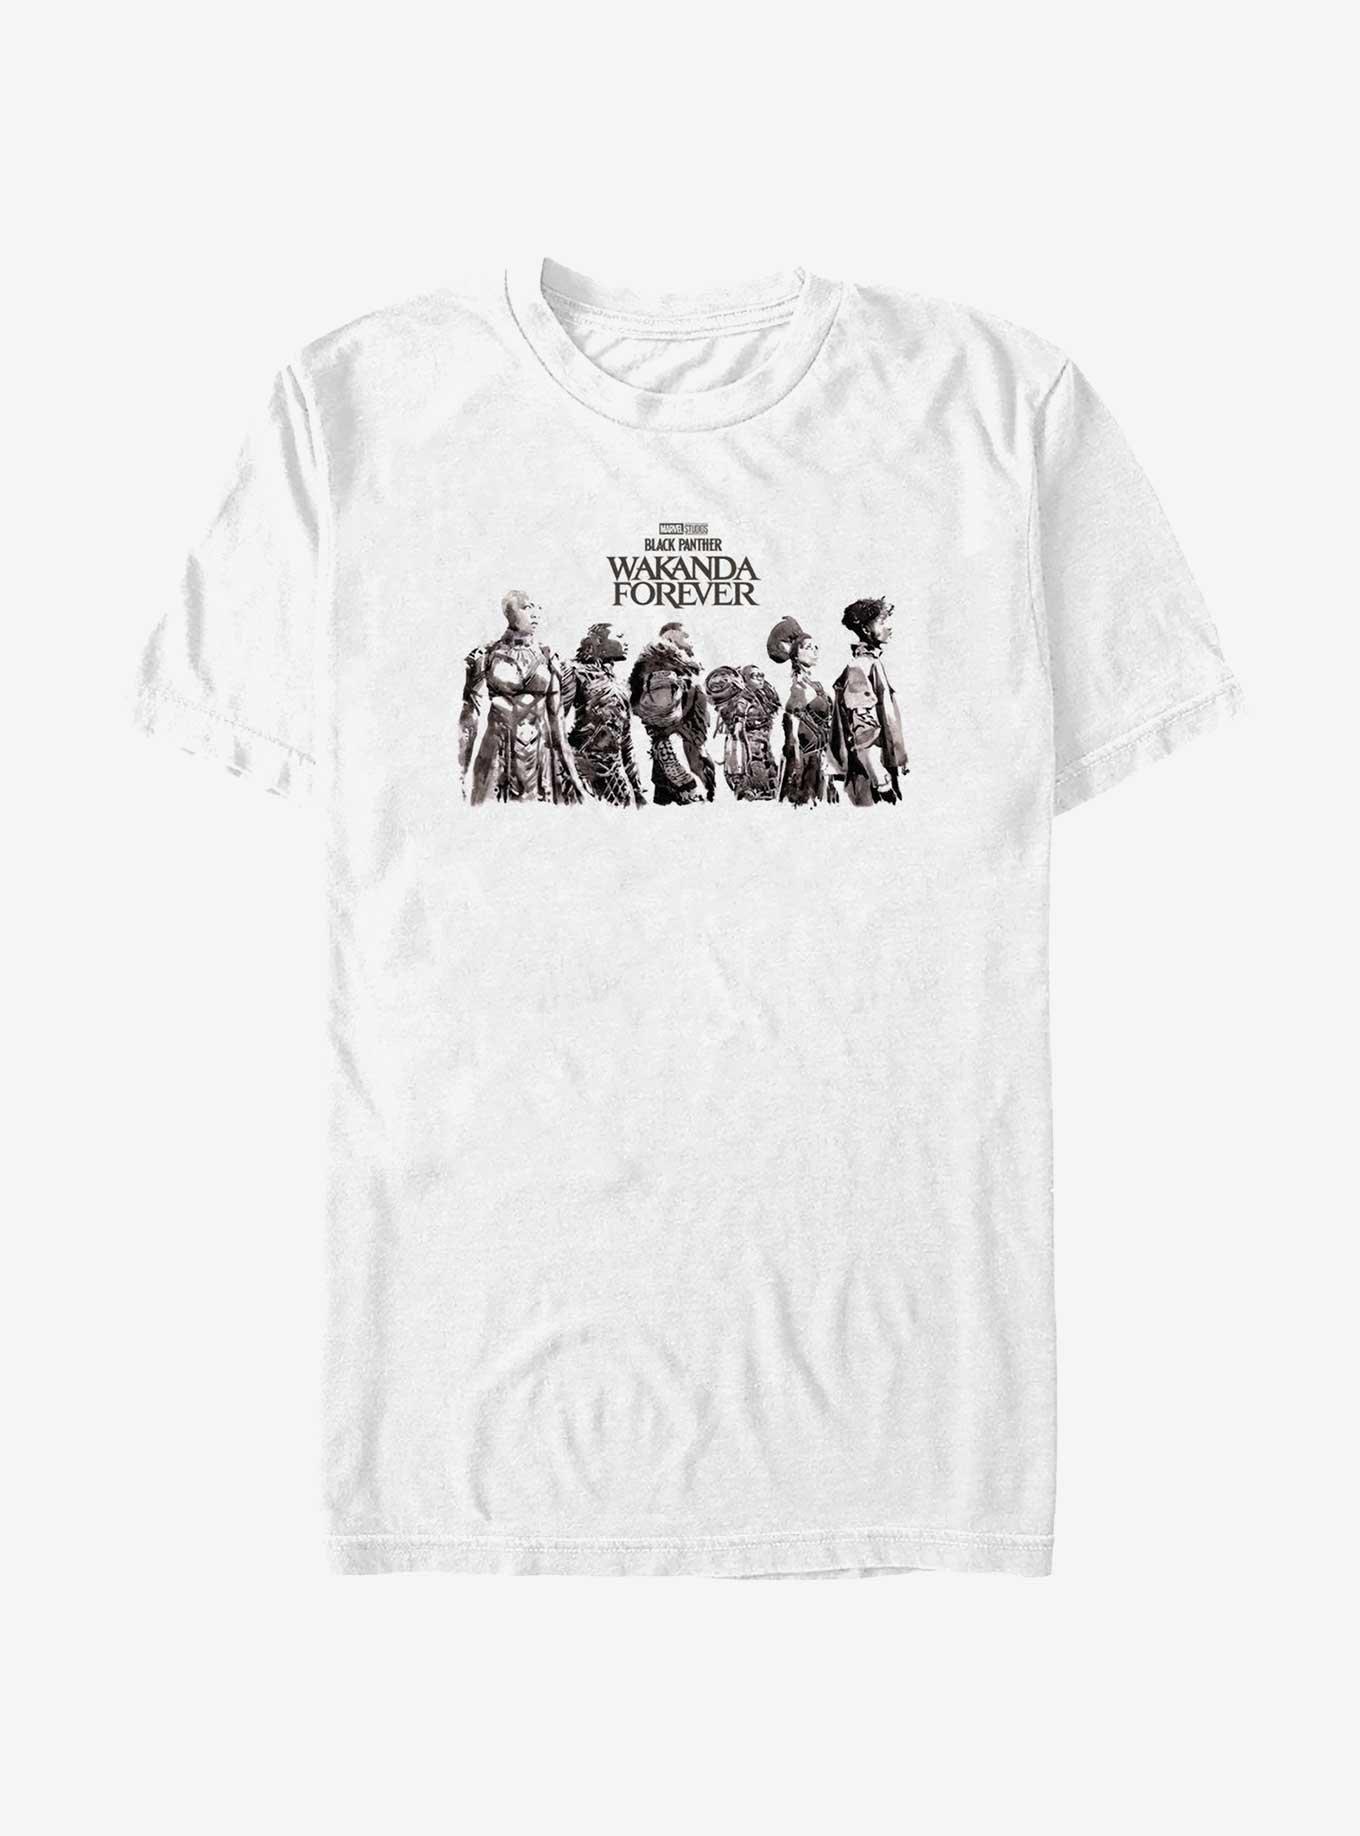 Marvel Black Panther: Wakanda Forever Character Lineup T-Shirt, WHITE, hi-res